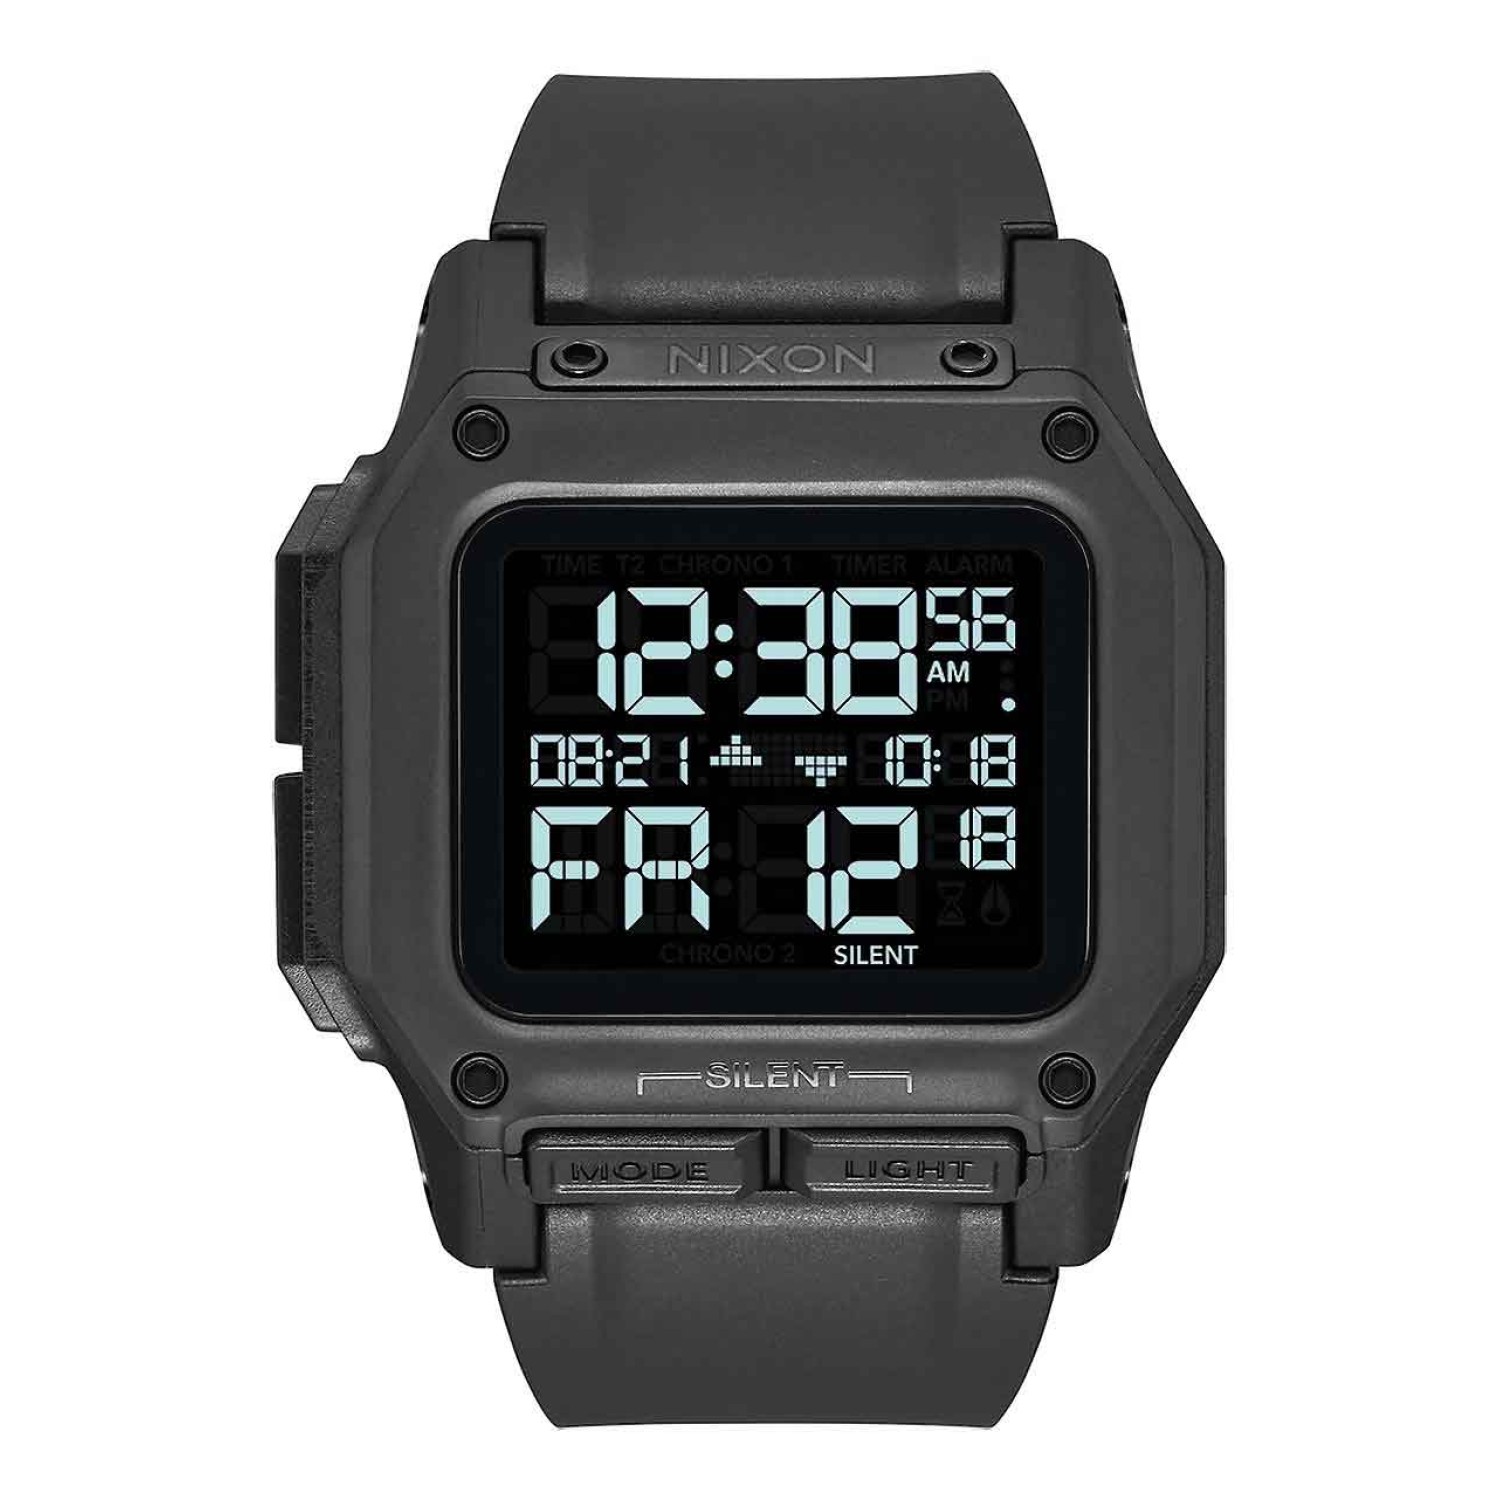 A1180-001-00 NIXON Mens Regulus  Chronograph Watch. Custom LCD module with 100m water resistance, dual chronographs, oversized LED backlight display, and fiber-reinforced case made to withstand even the harshest conditions.2 Year  Guarantee Oxipay is simp